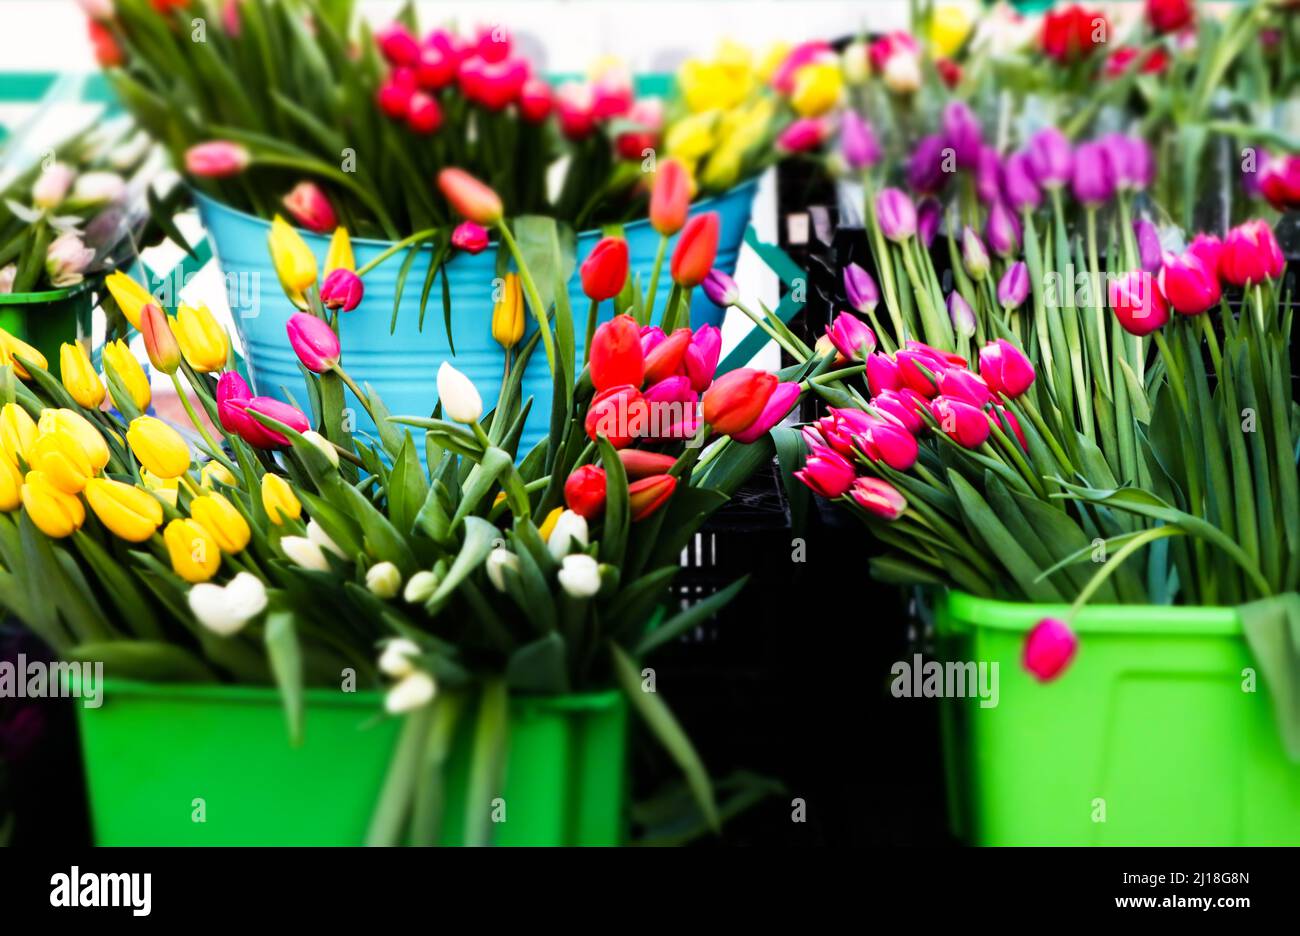 Selling multicolored tulips bunches in green buckets on street. Assortment of spring flowers in flower store. Potted bulb garden blossoms. Floral gift Stock Photo